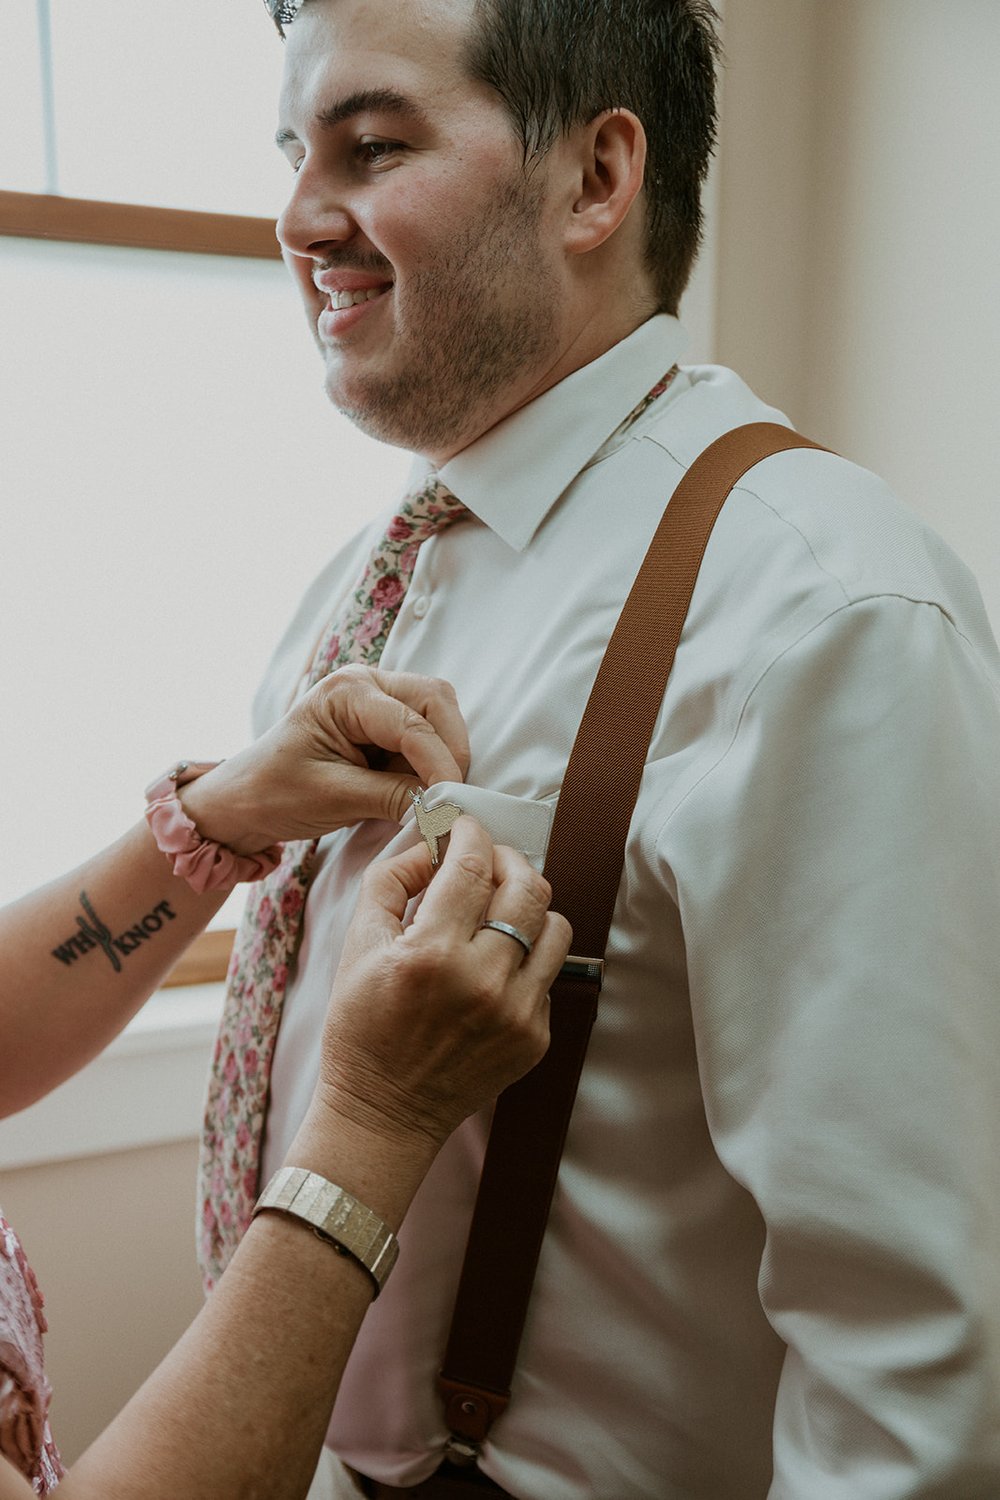 Mother of the groom attaches the boutonniere to the grooms shirt.